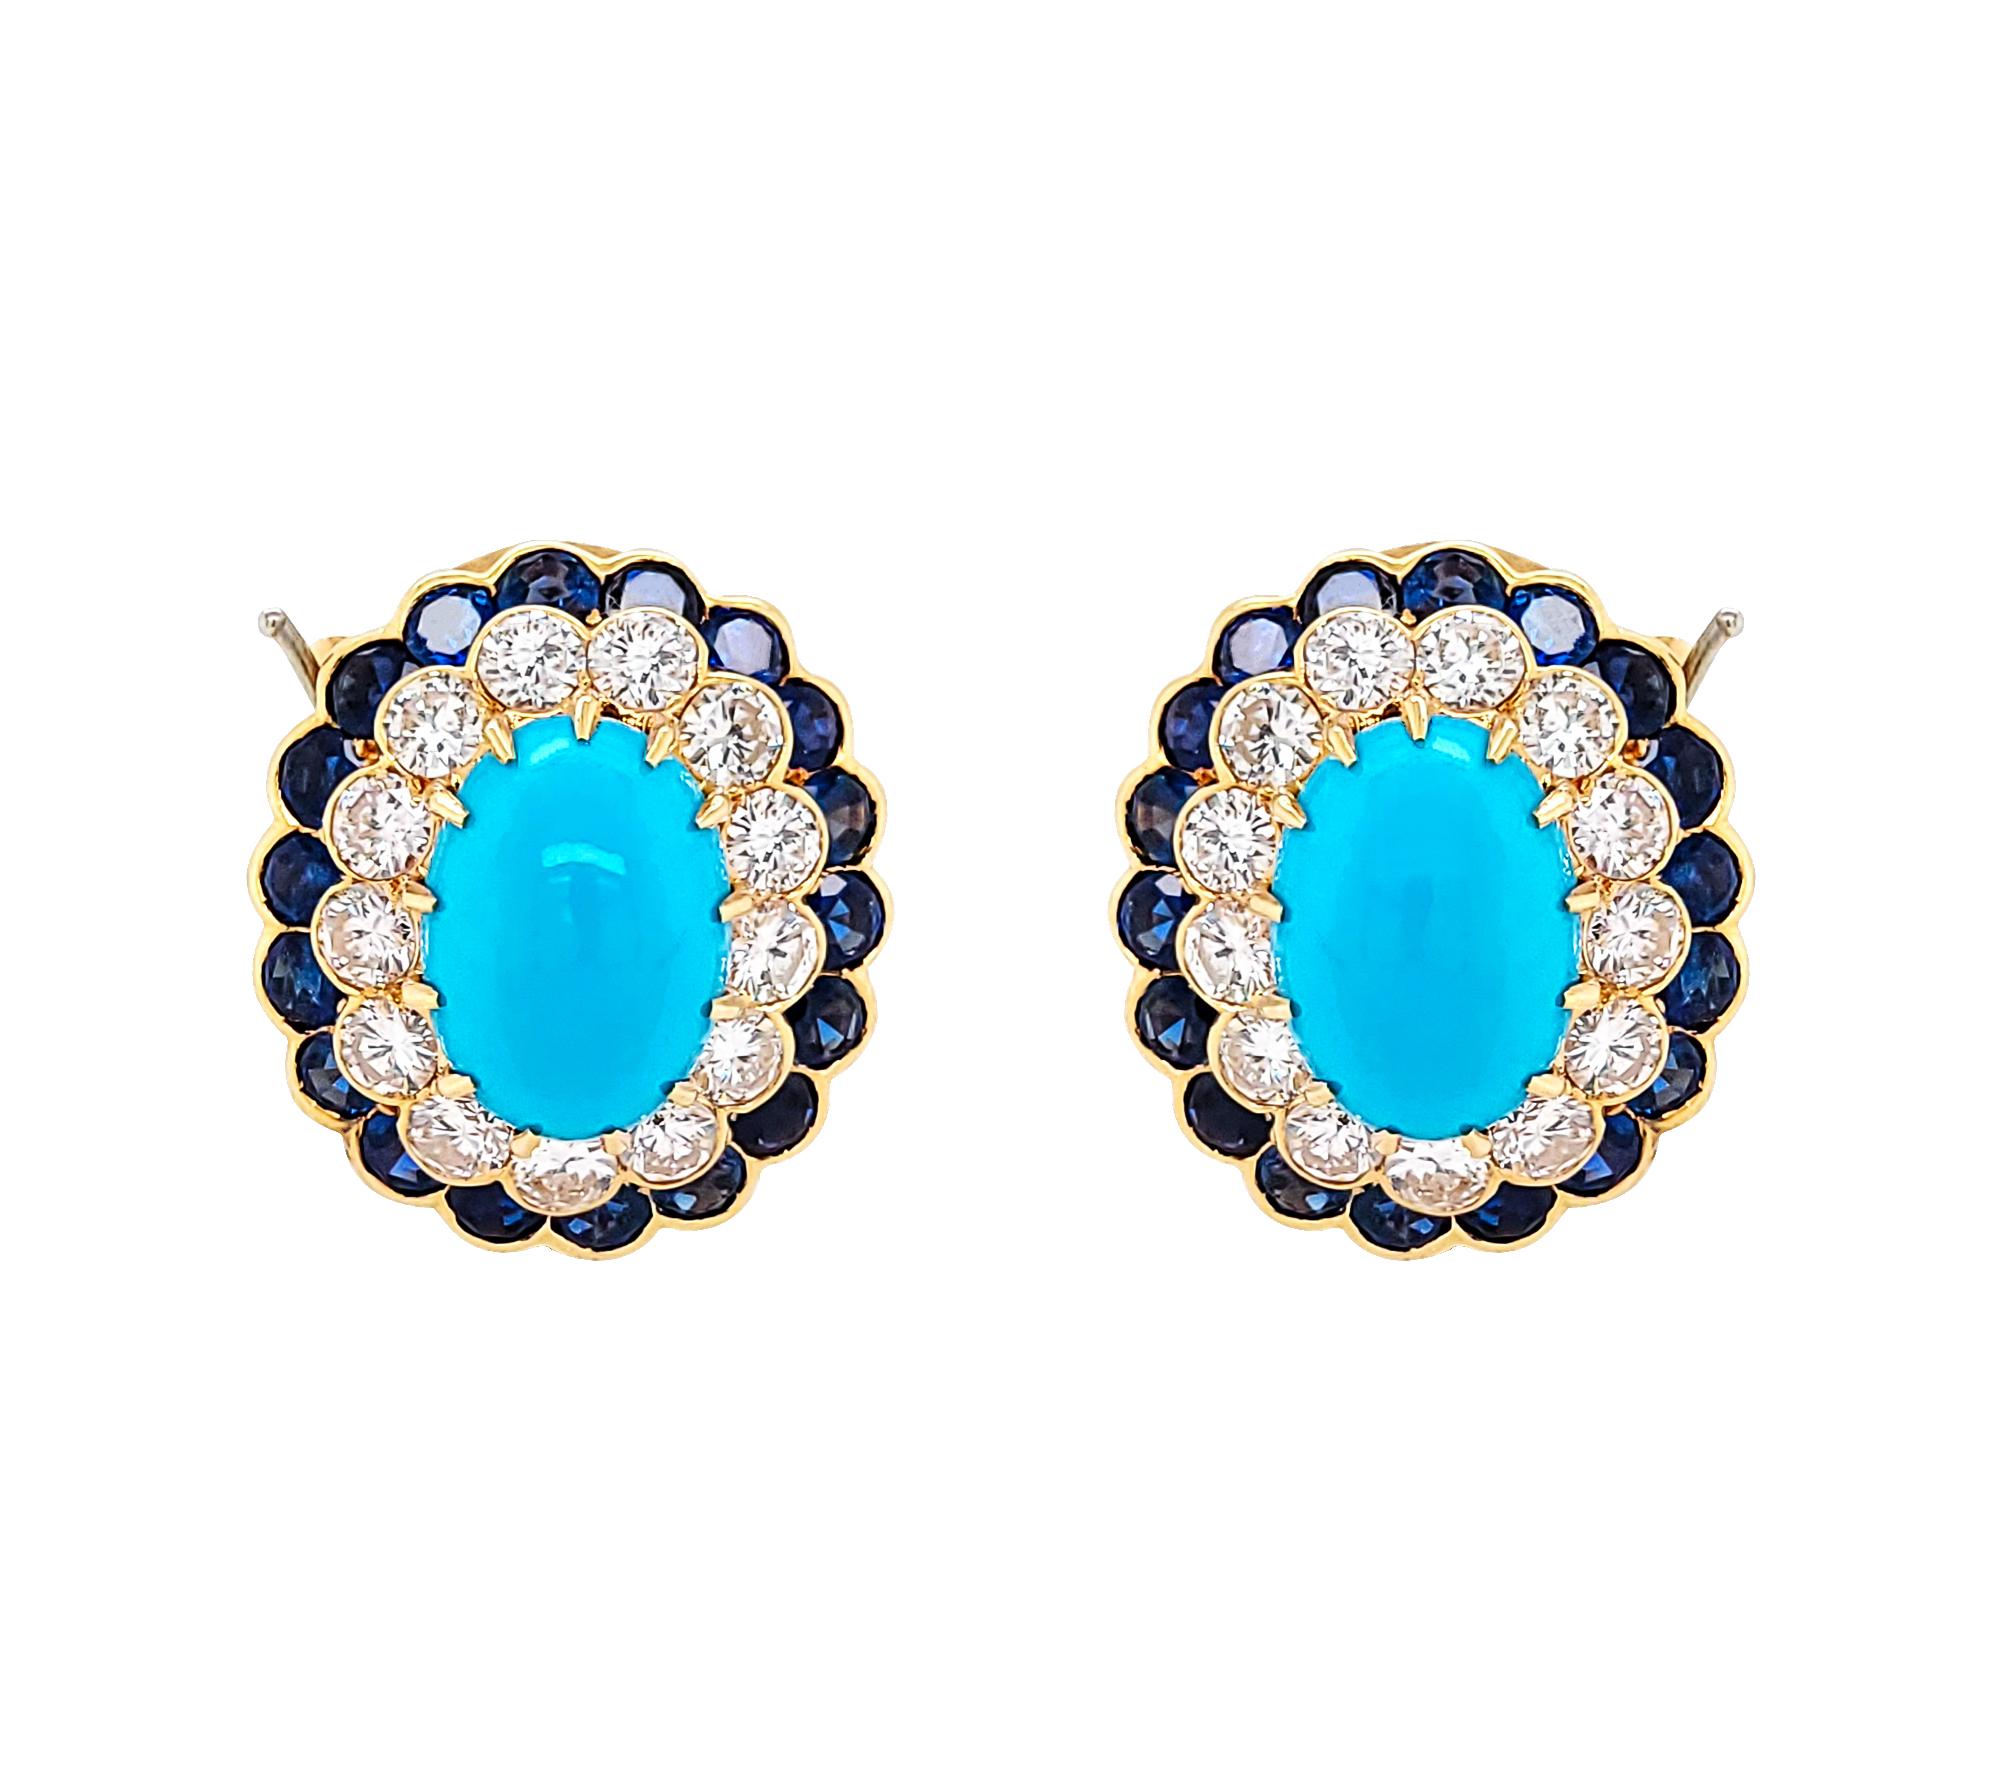 Fabulous ear clips made by Van Cleef & Arpels in 1965. 
The ear clips are convertible and can be worn as drop earrings and ear clips. 
The earrings are featuring four cabochon turquoise stones, round diamonds and sapphires. 
The metal is 18k yellow